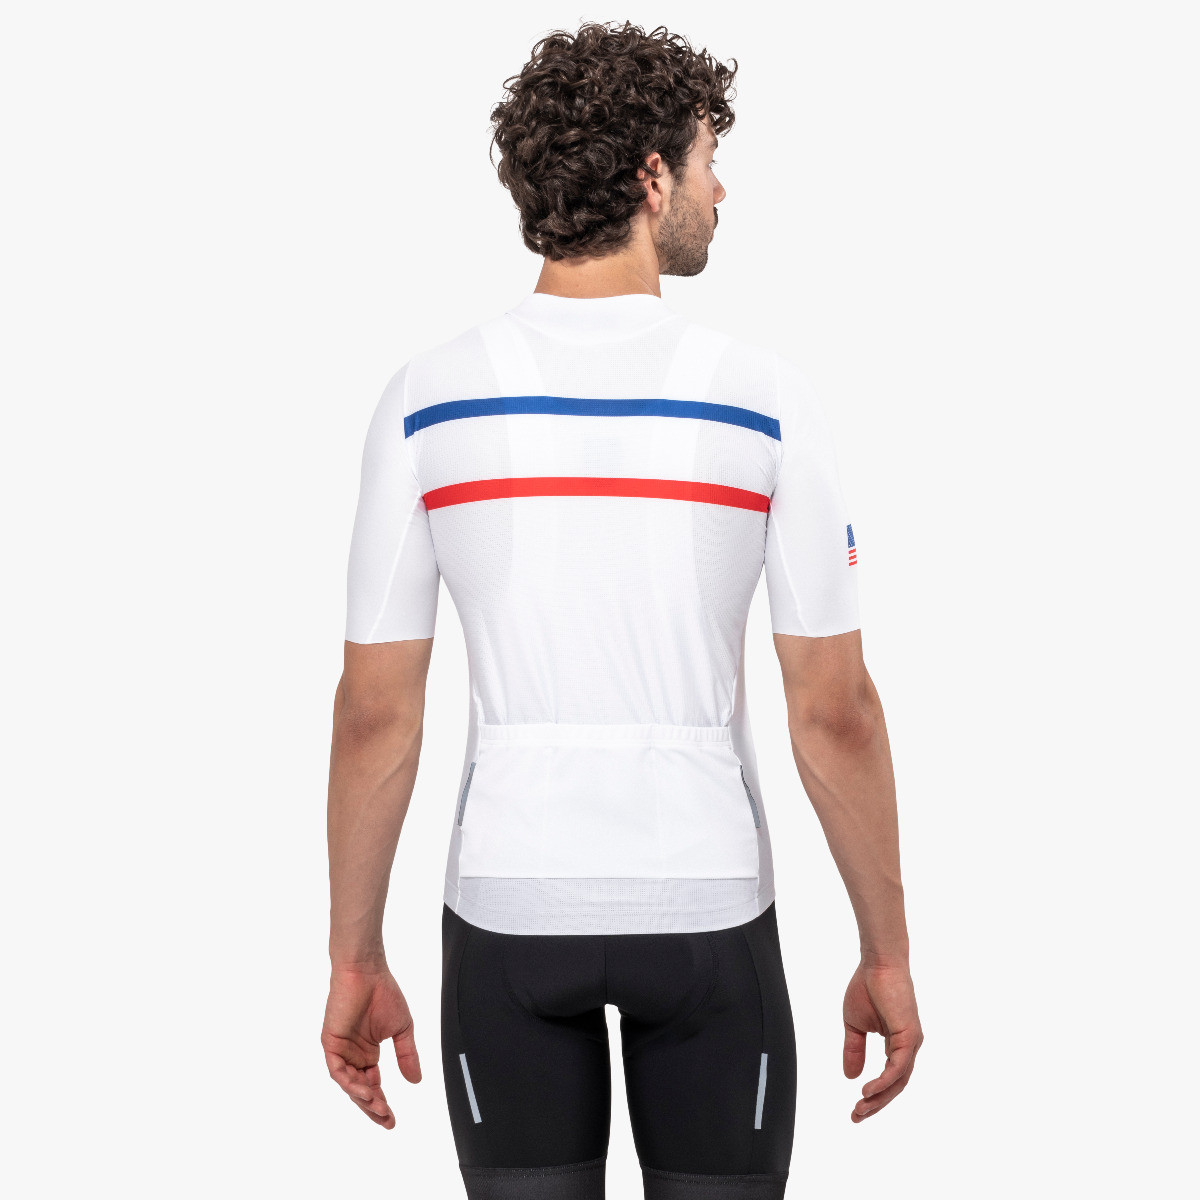 scicon space agency cycling clothing jersey nasa 05